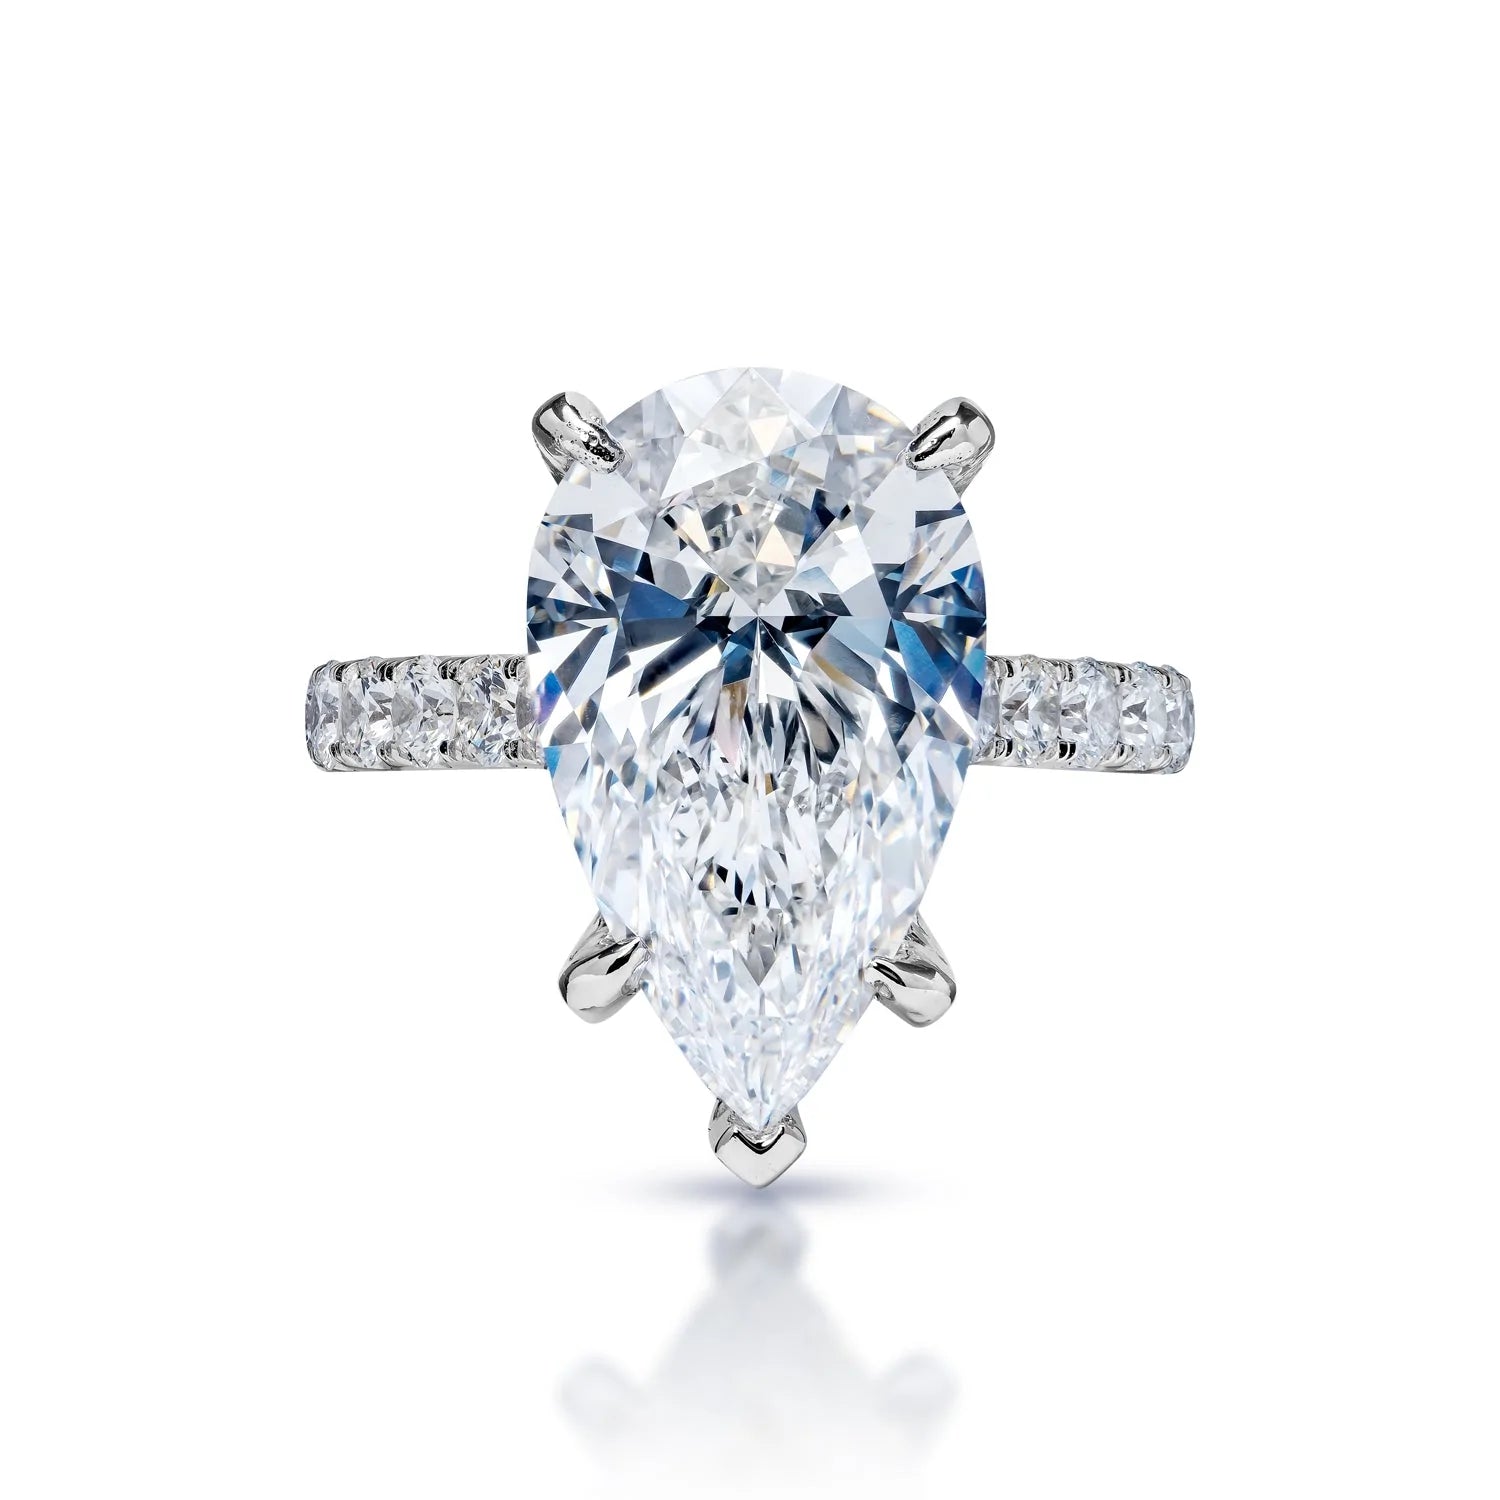 Lillianna 9 Carat H VS1 Pear Shape Lab Grown Diamond Engagement Ring in White Gold Front View 